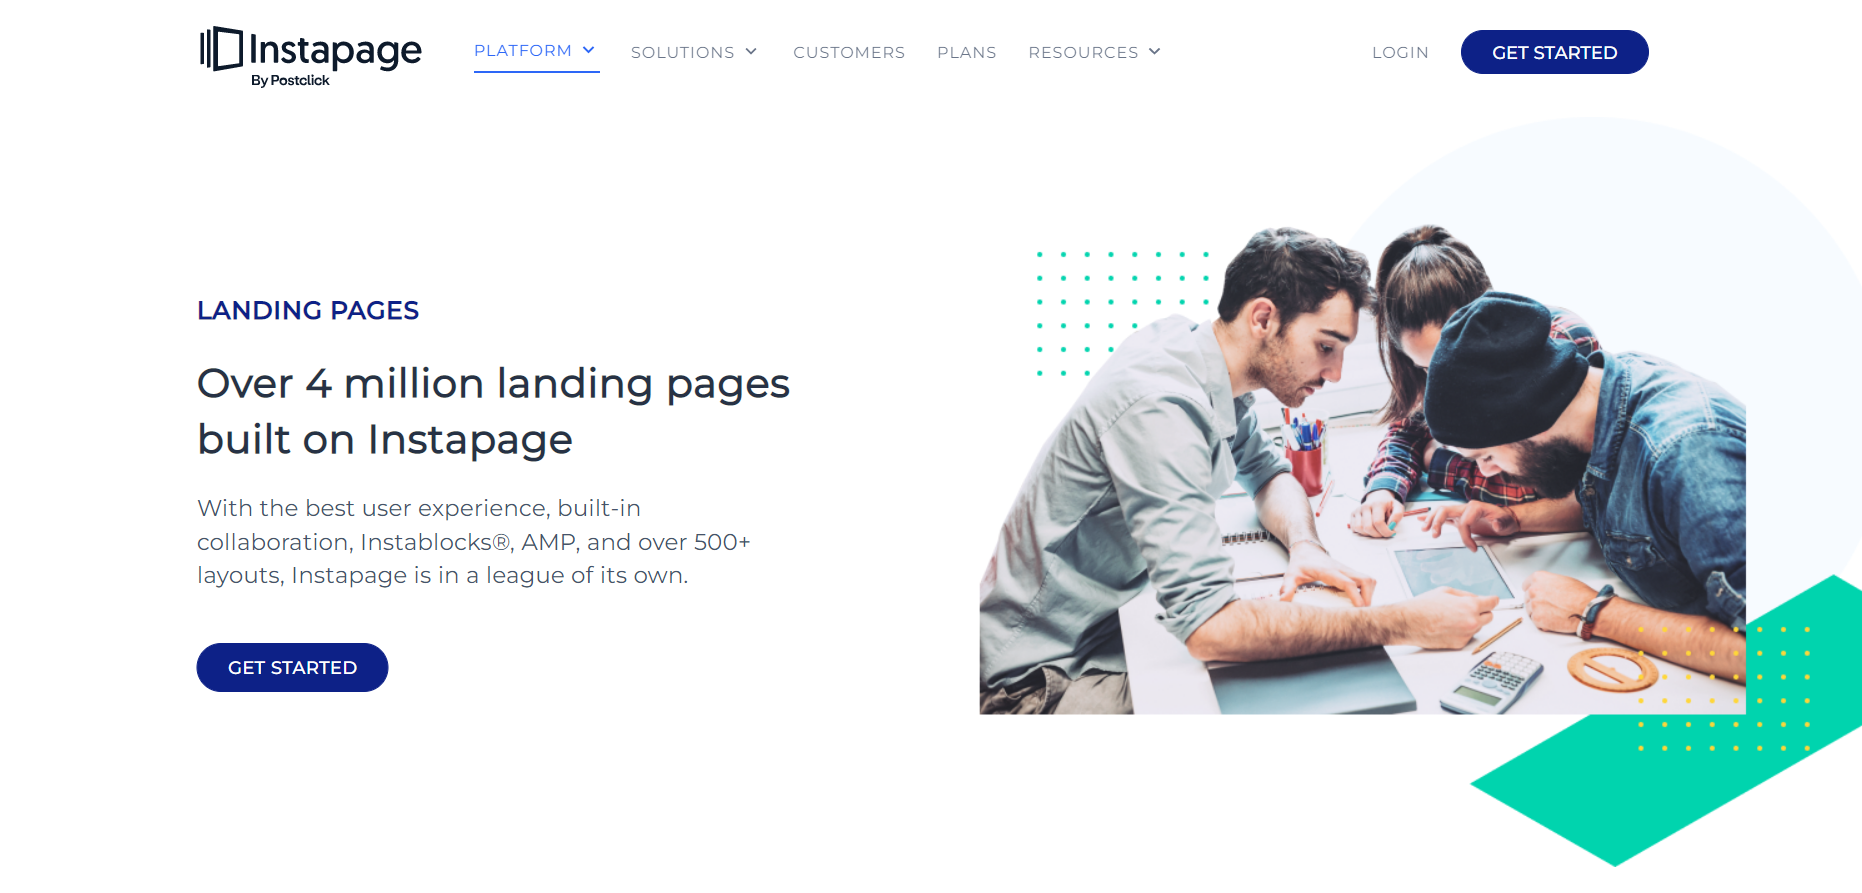 Instapage is a powerful landing page builder